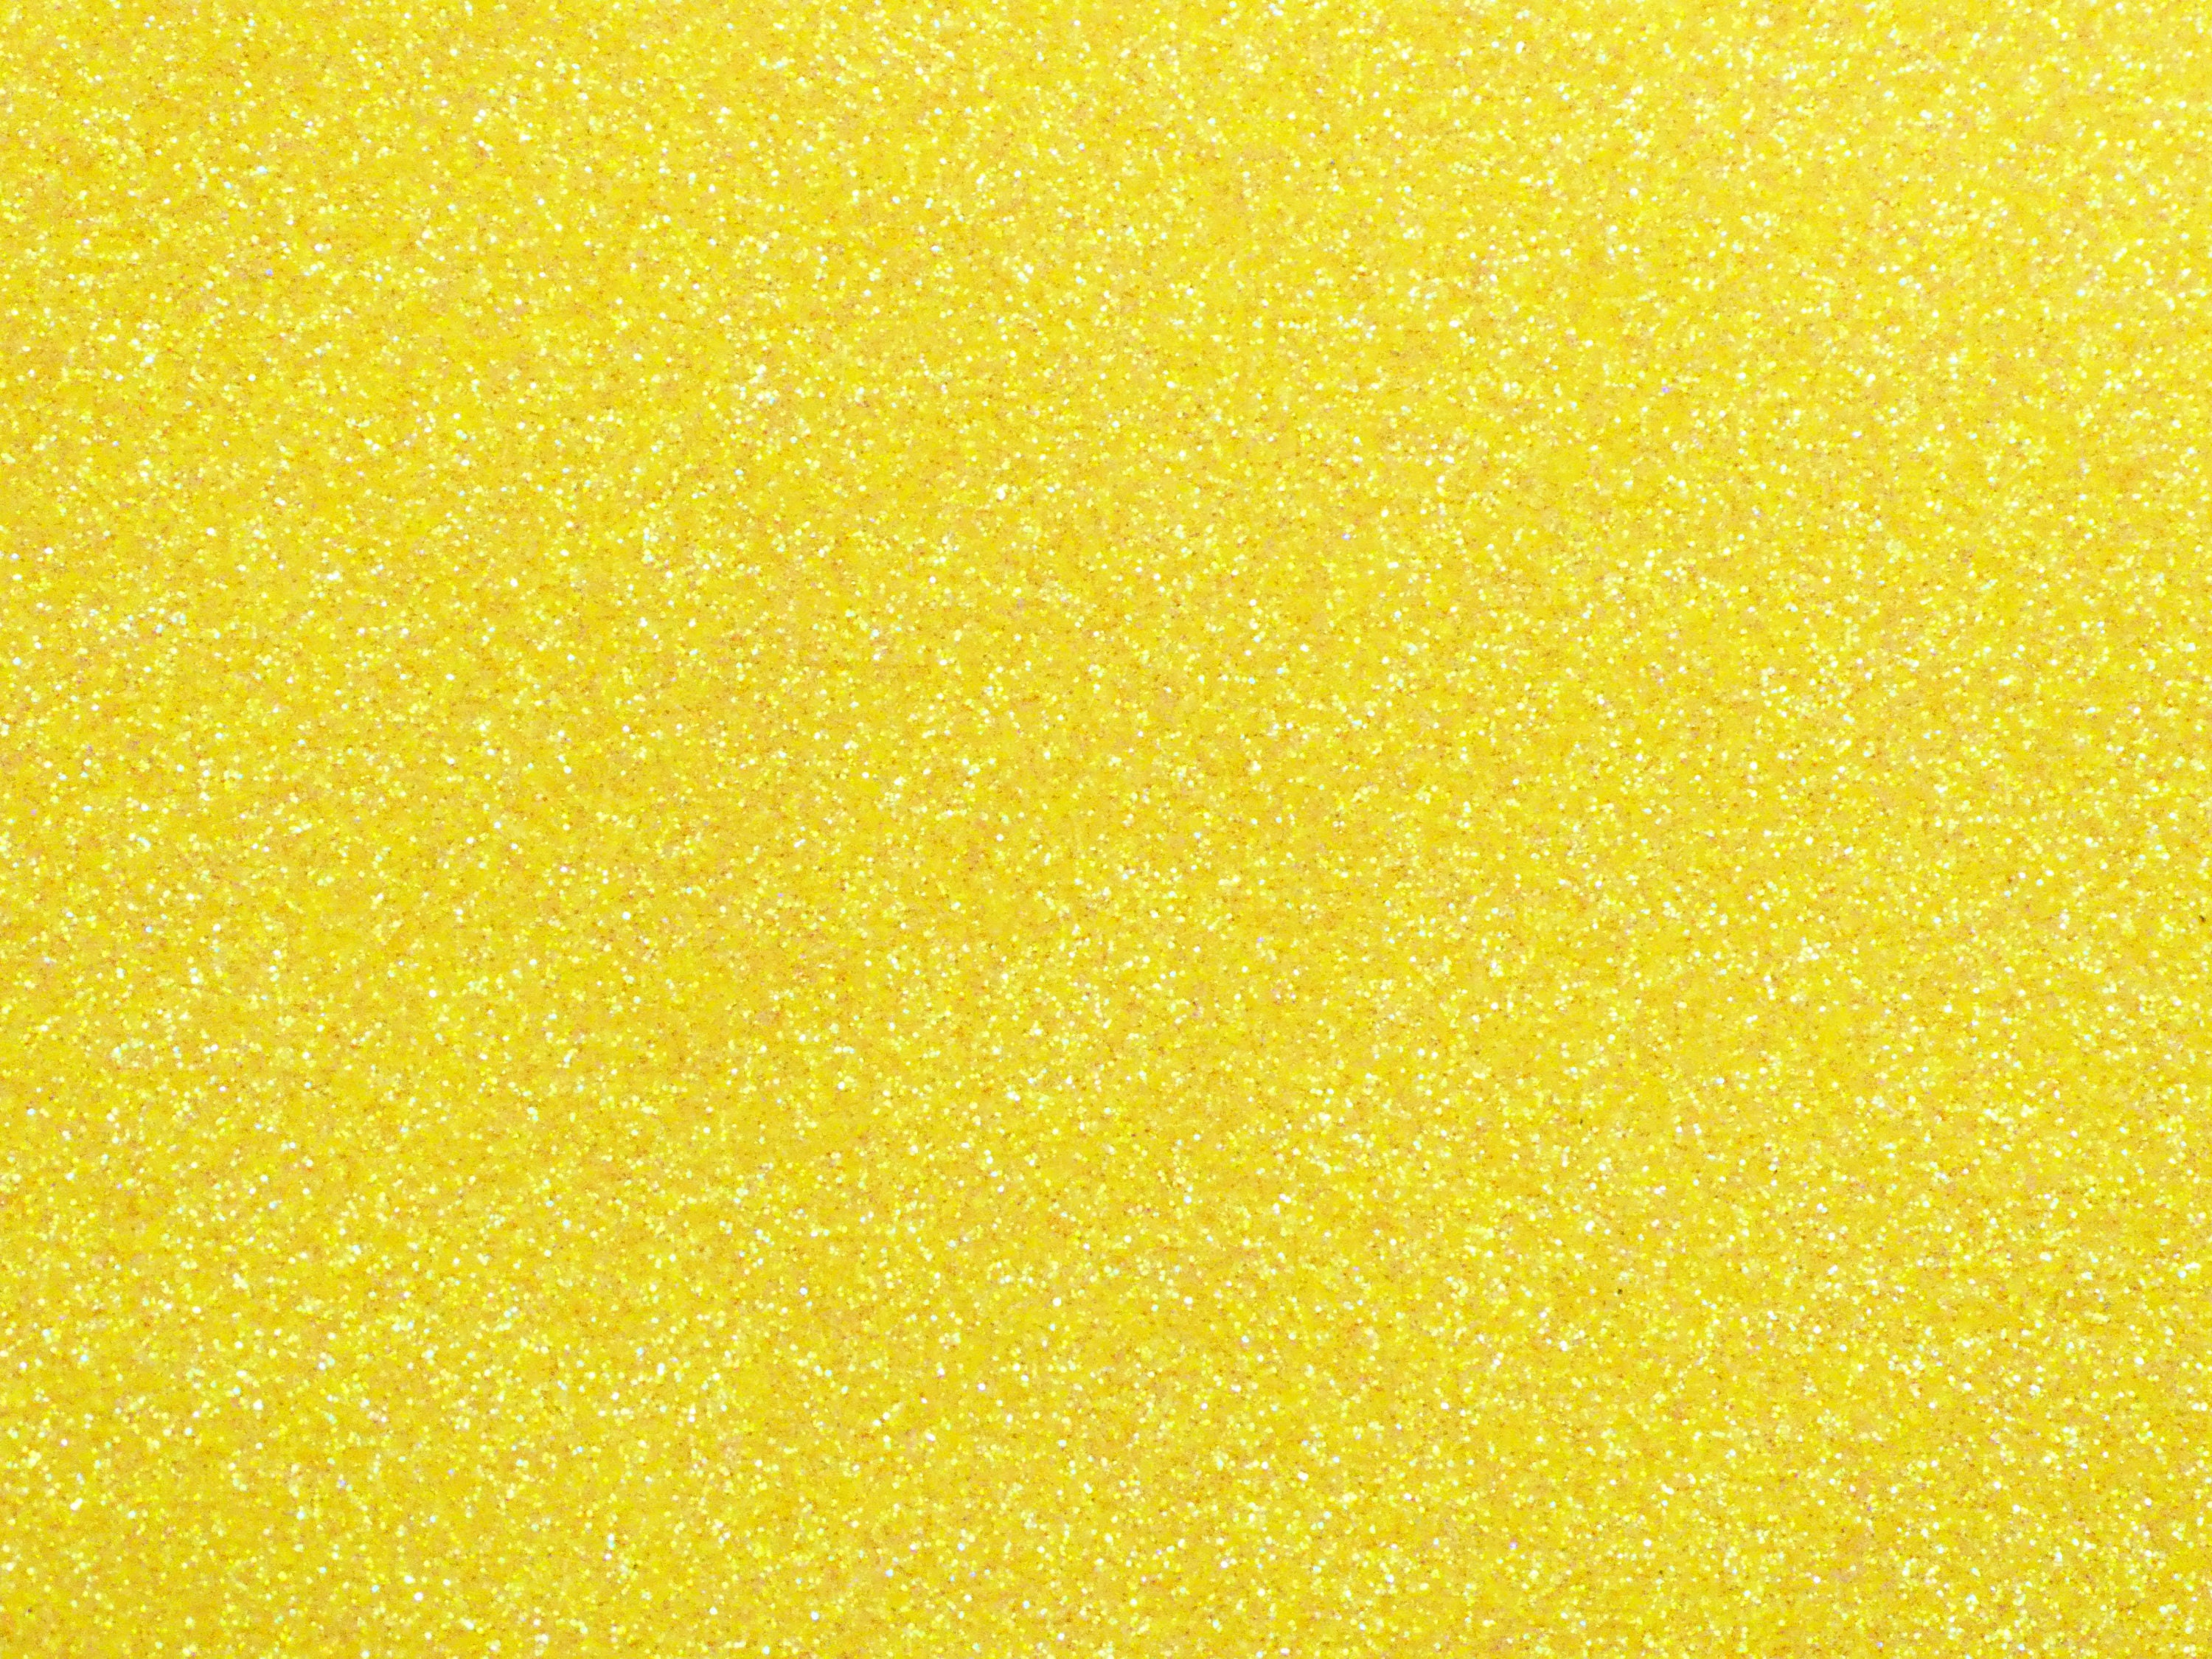 Fine GLITTER 12x12 GOLD Glitter applied to beige Leather THiCK 5 oz/ 2 mm  PeggySueAlso® E4355-34